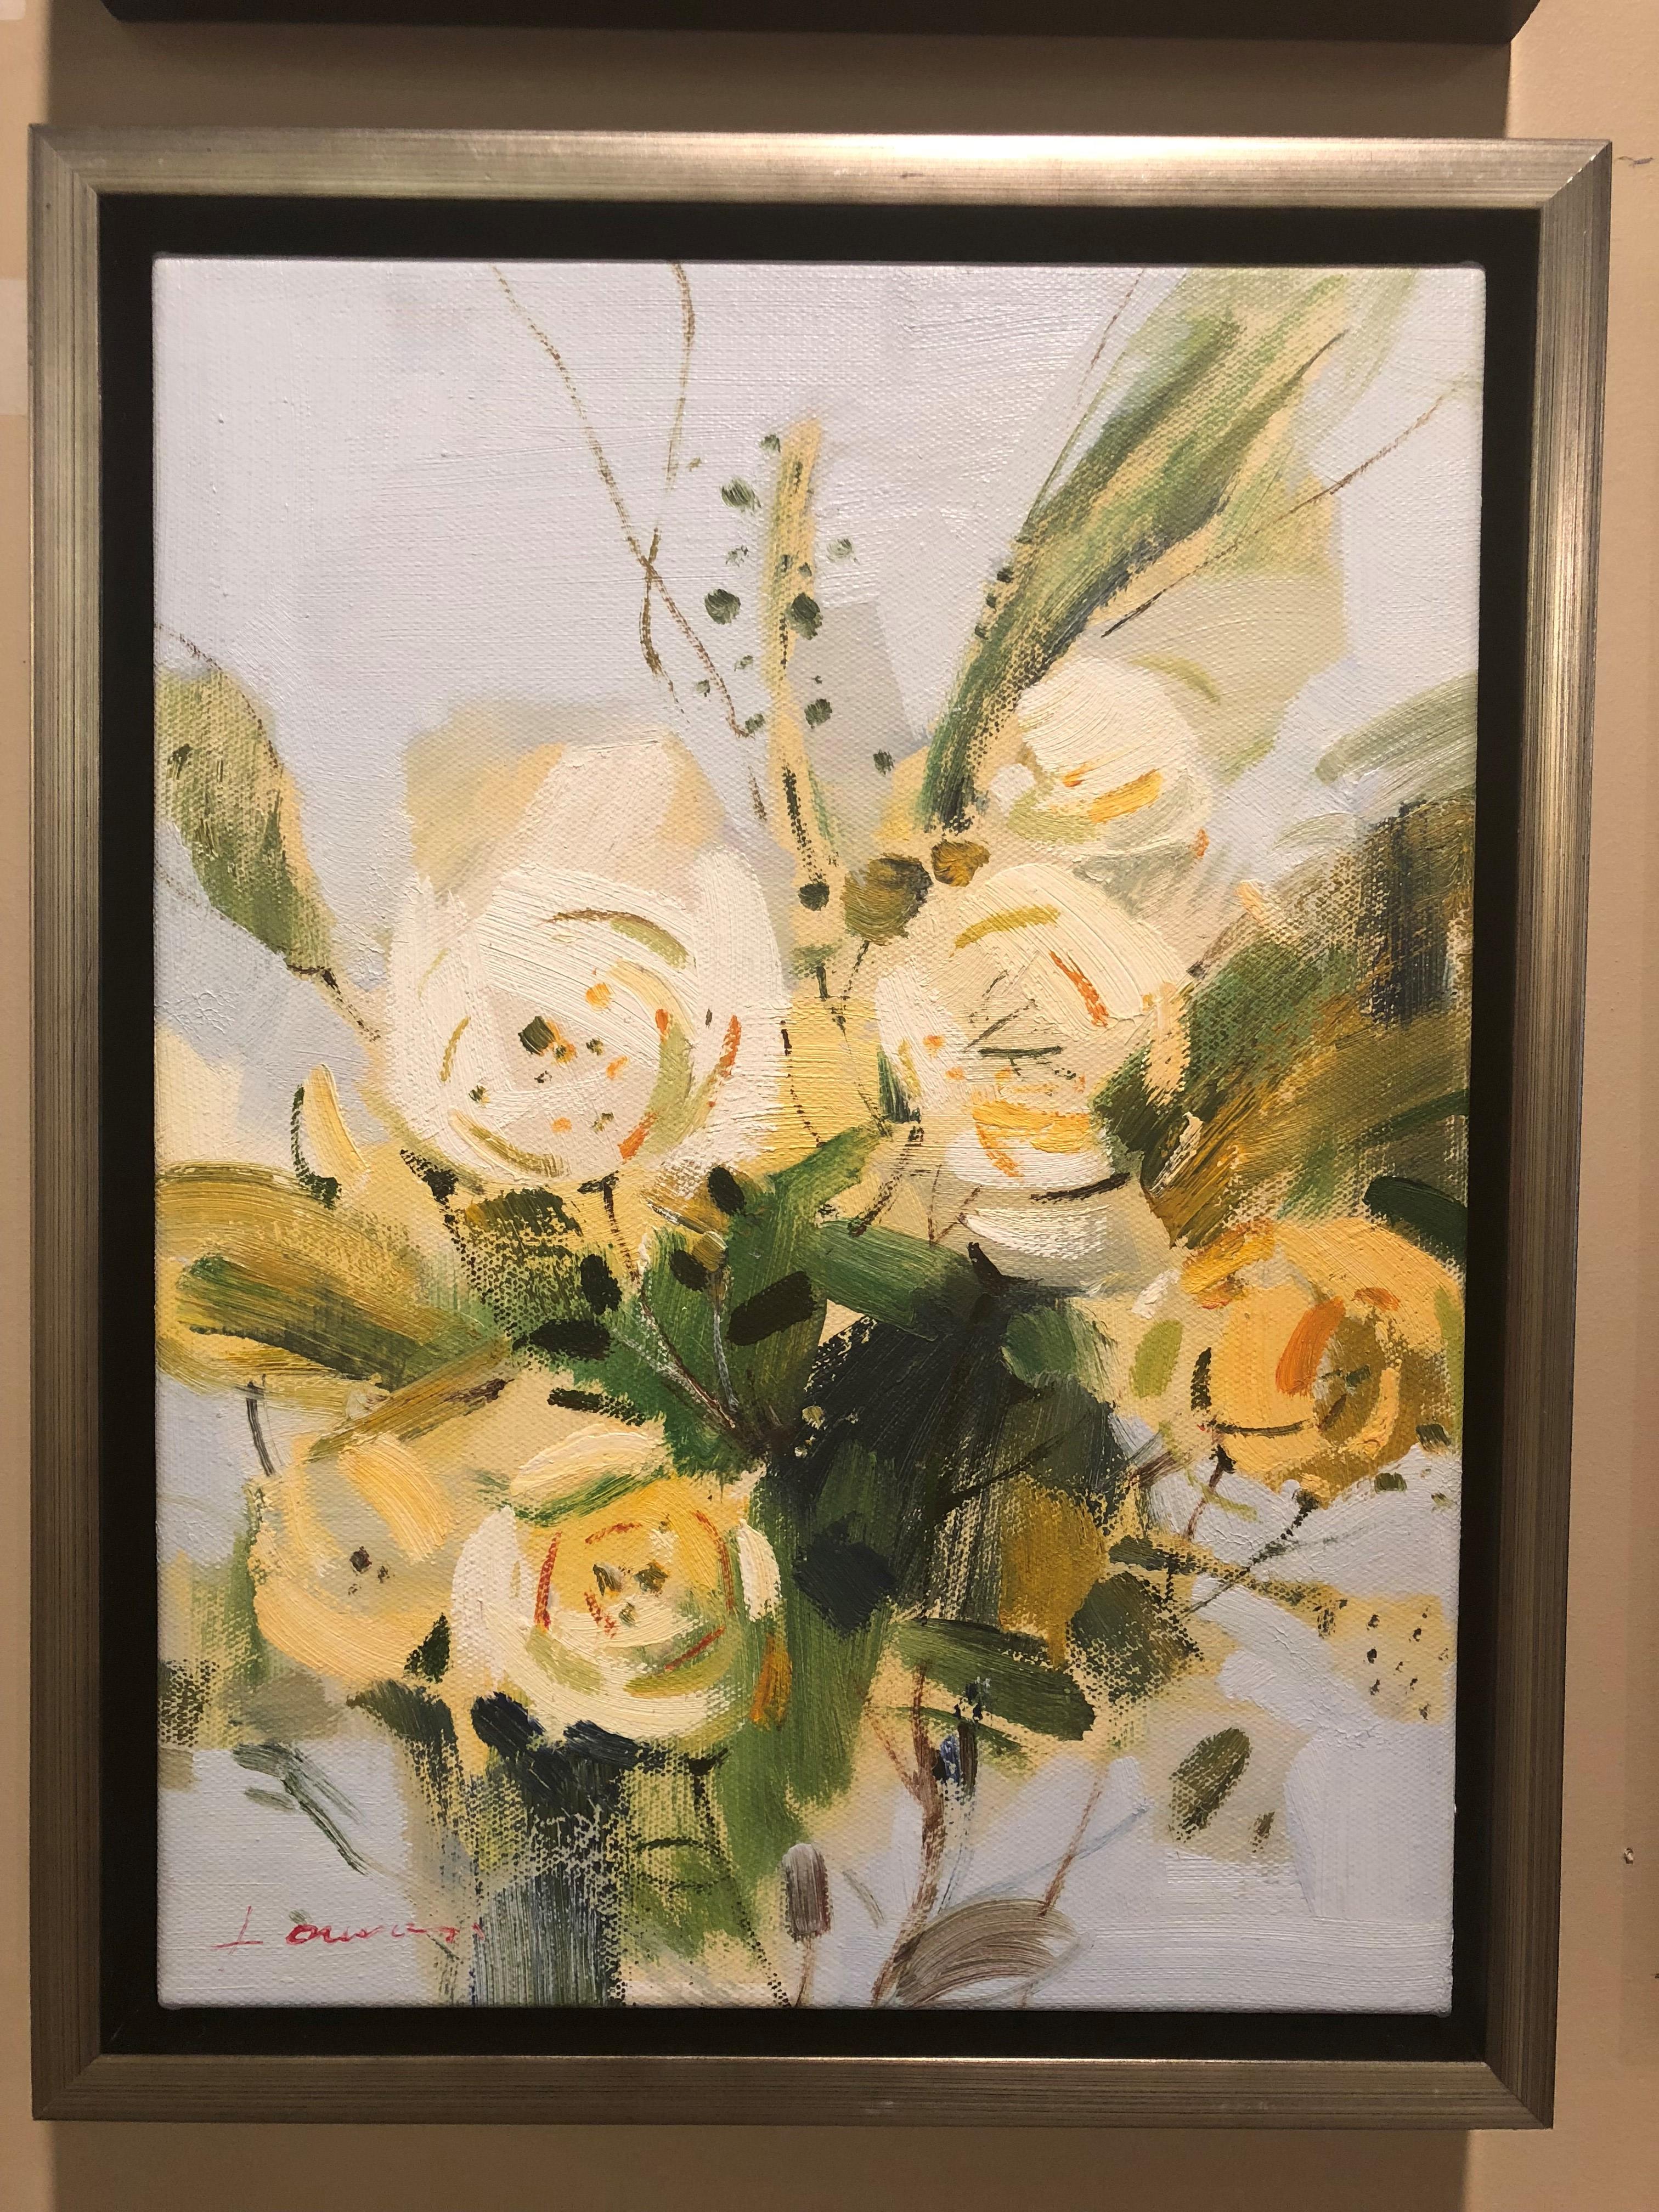 Item is in excellent condition and has only been displayed in a gallery setting. Item includes custom built frame; framed dimensions are approximately 14 x 18 inches.

Laura was born May 15th, 1983 at TaeRings City, RyoLing Providence in China.